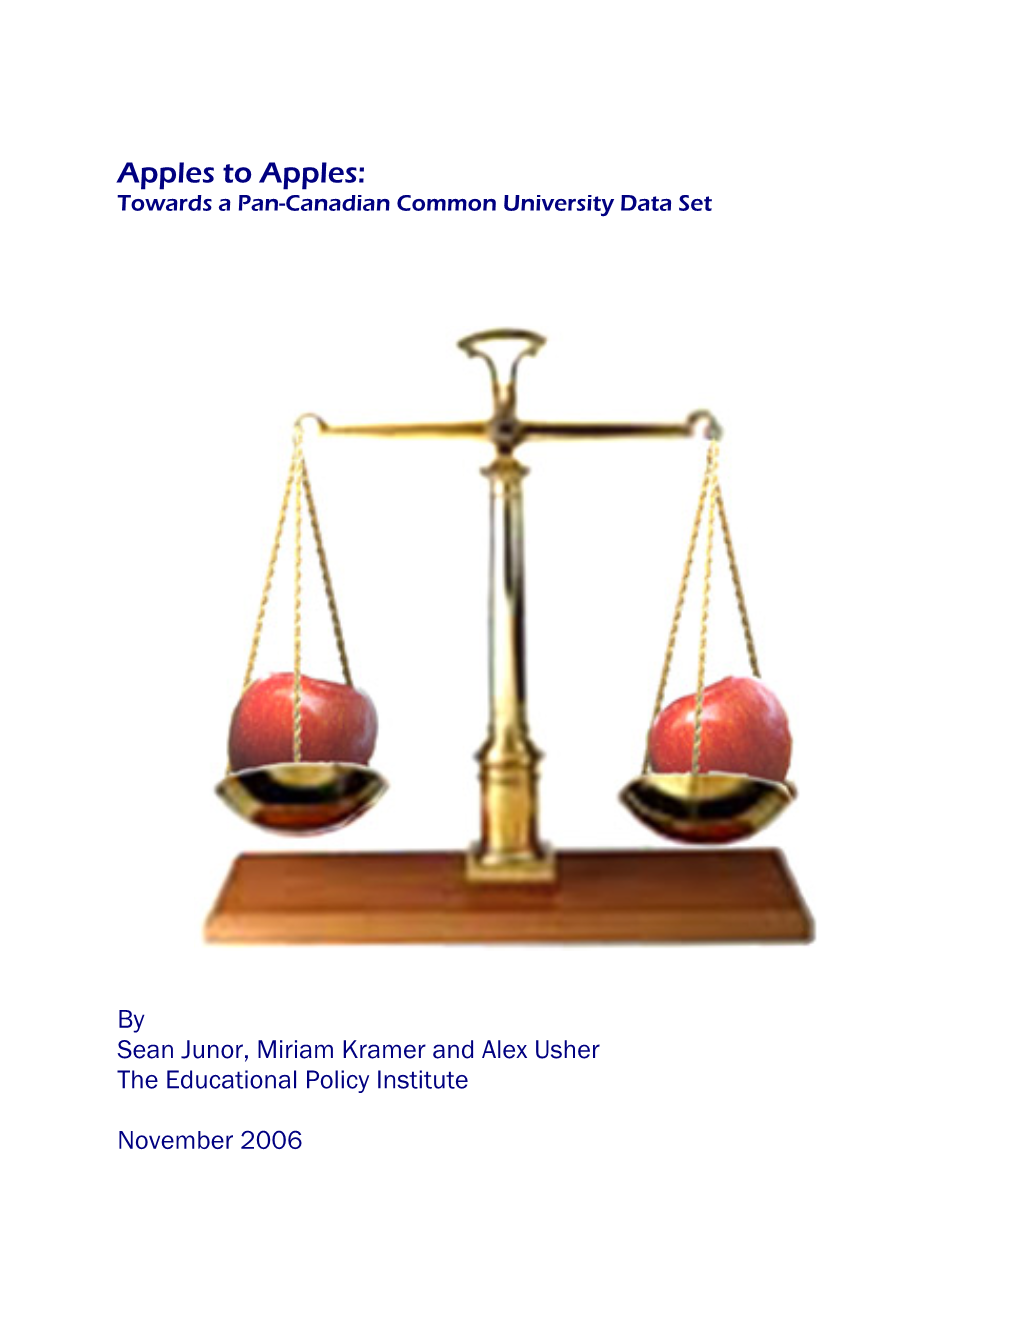 Apples to Apples: Towards a Pan-Canadian Common University Data Set